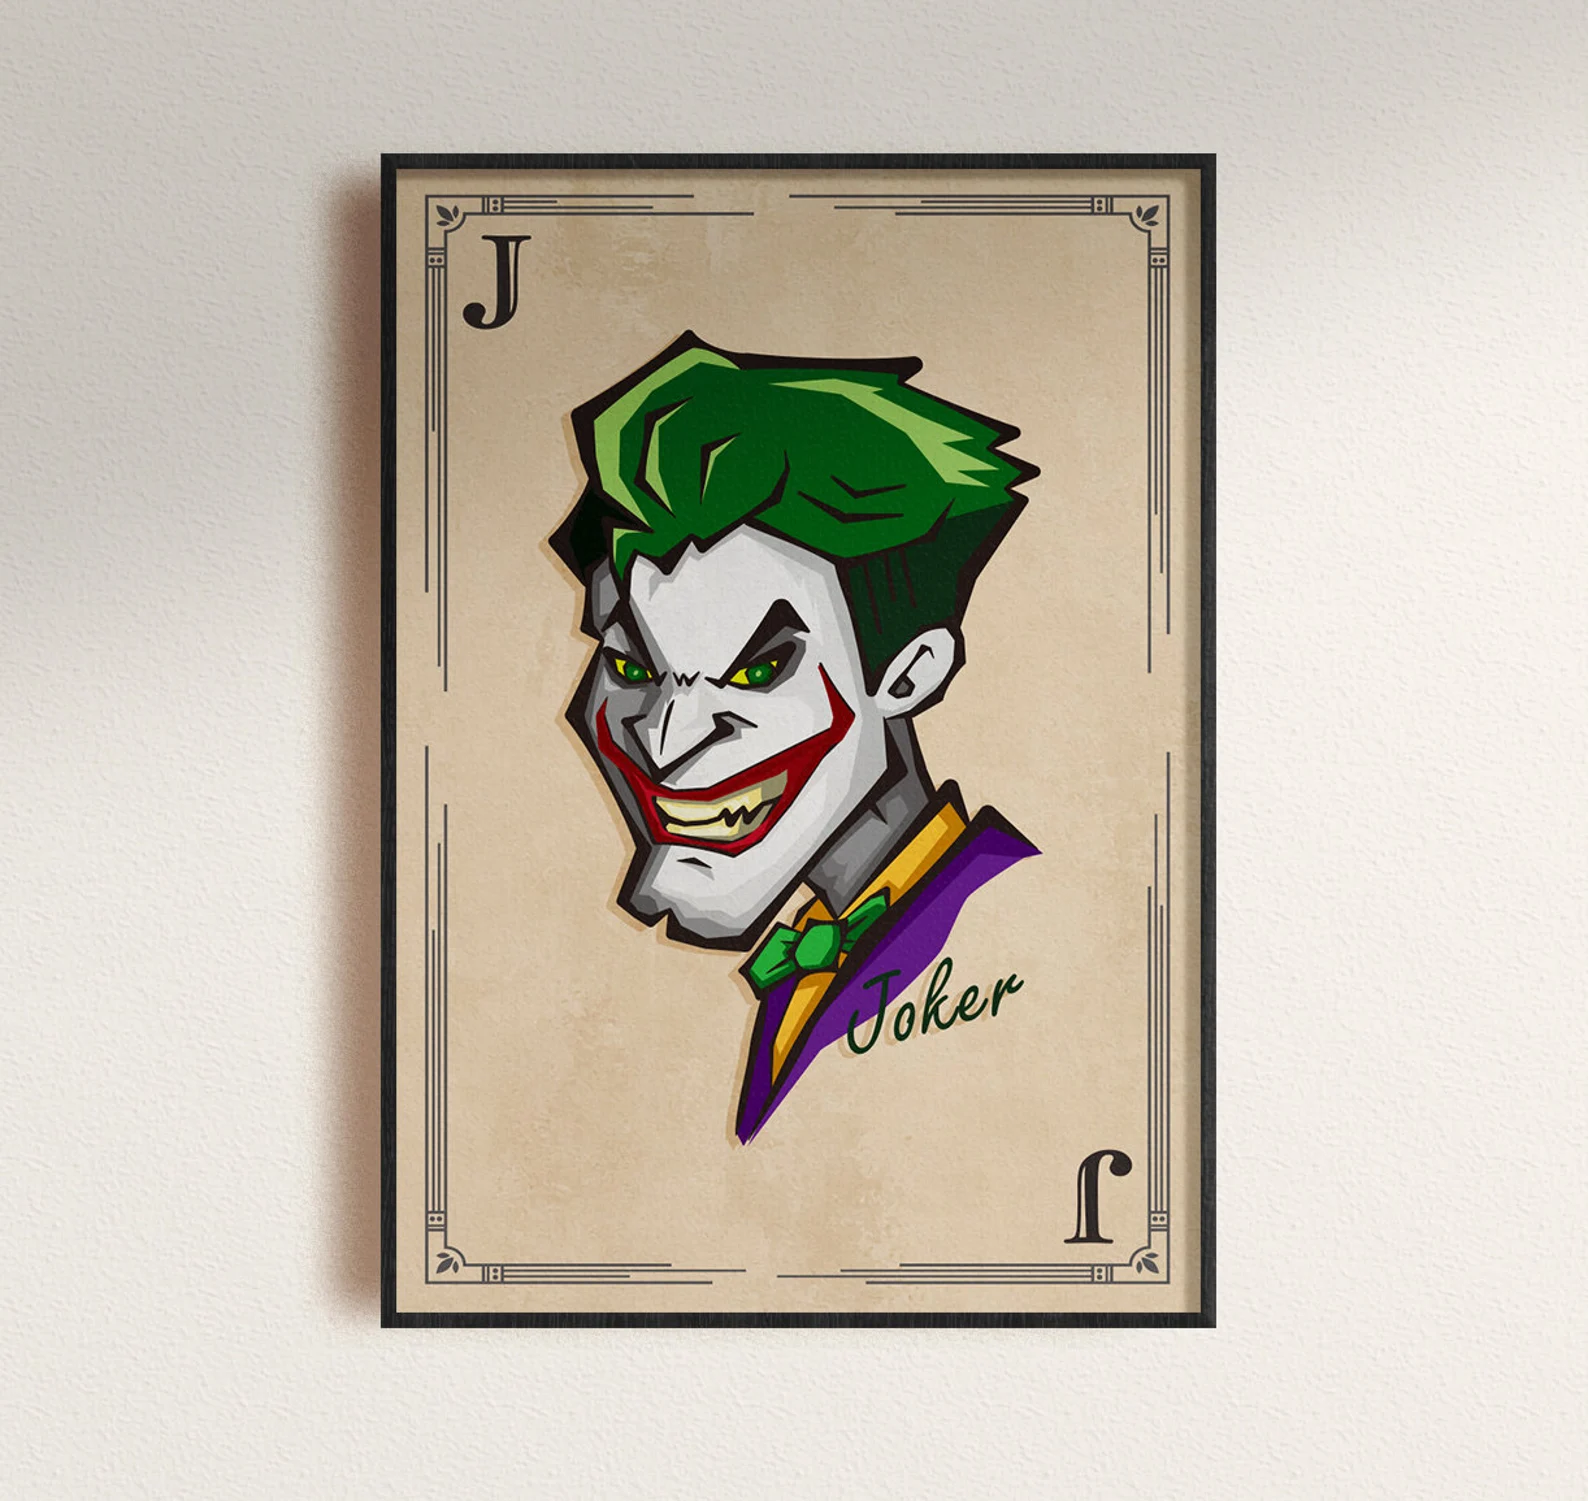 Wooden poster with Joker with short green hair.